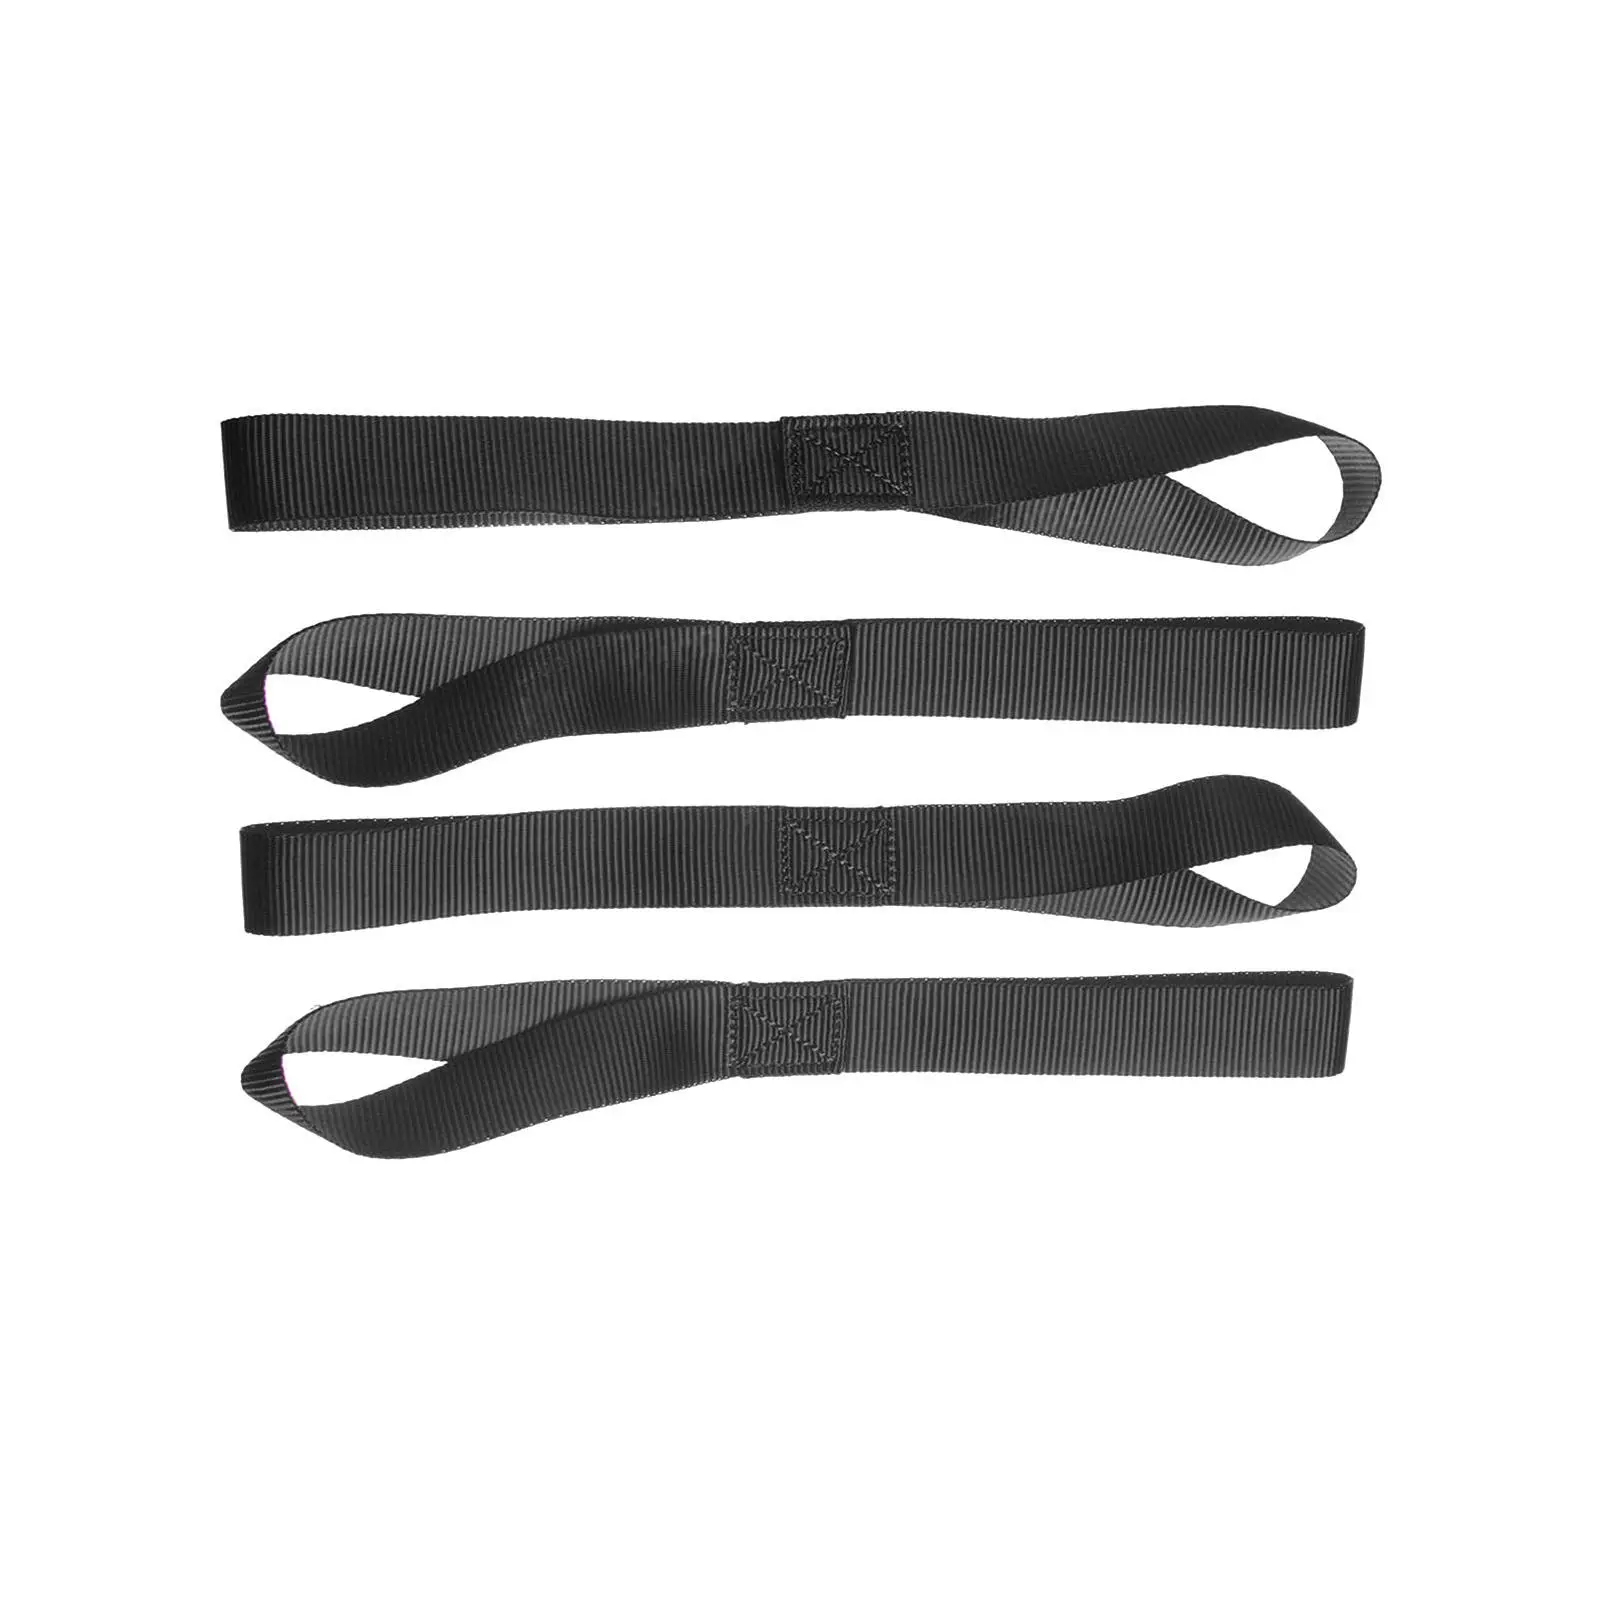 5 Pieces Soft Loop for Towing Trailering 8800lbs Breaking Strength Tie Downs